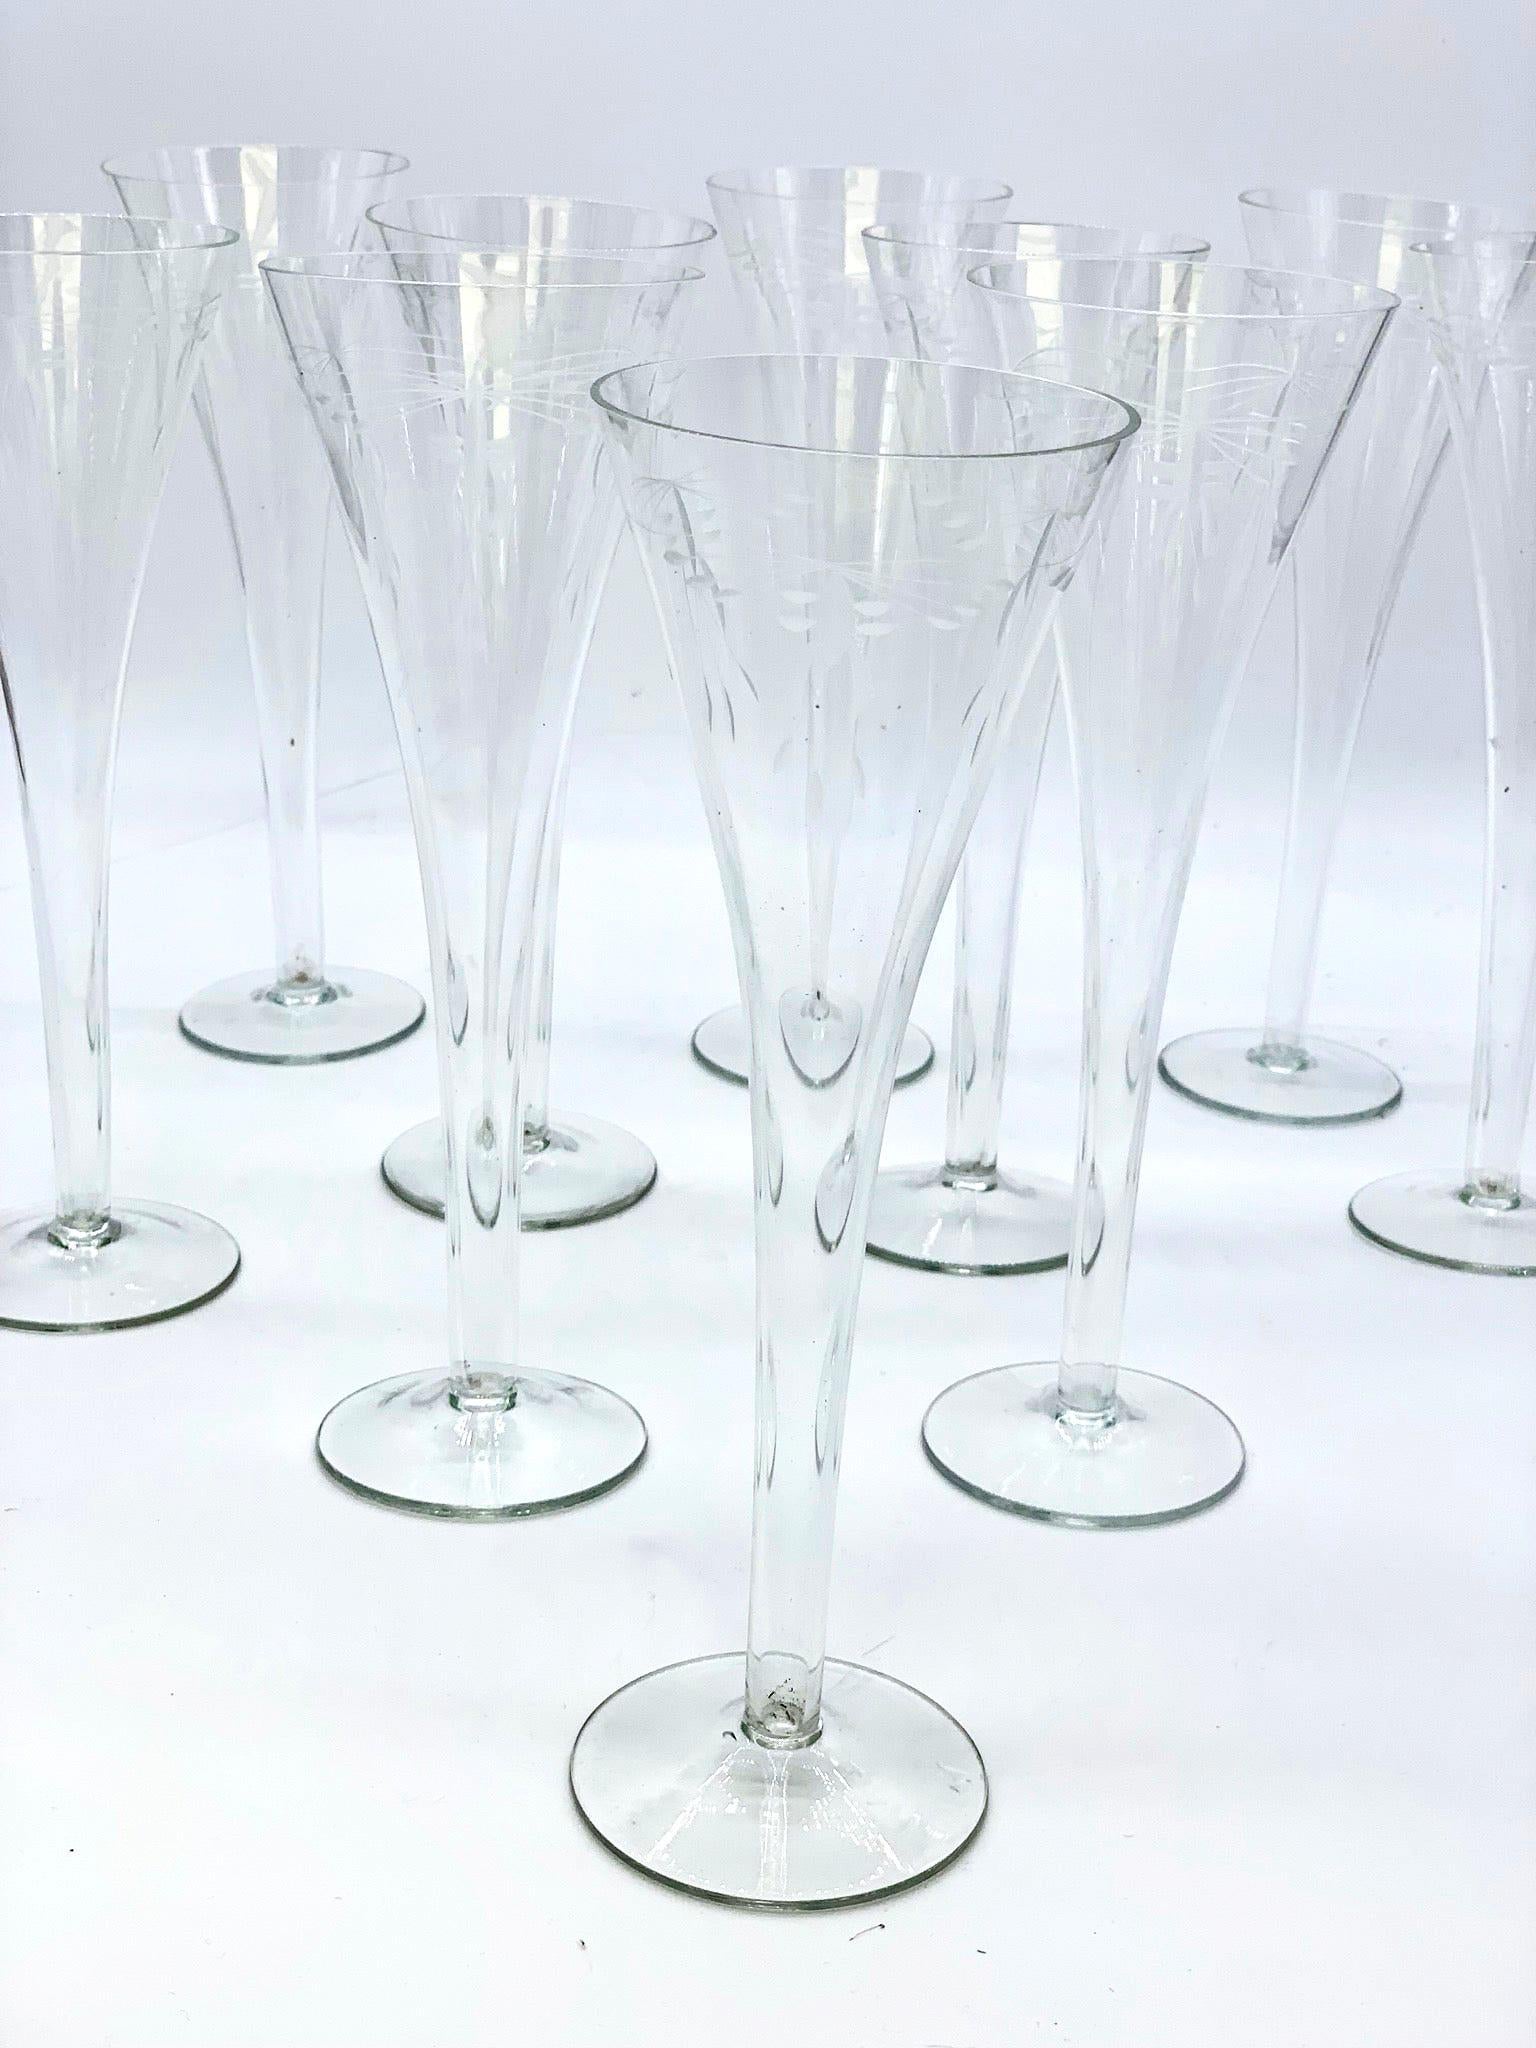 European 1900-1920 Art Nouveau Crystal Glasses Hand Blown with Engraved Flowers For Sale